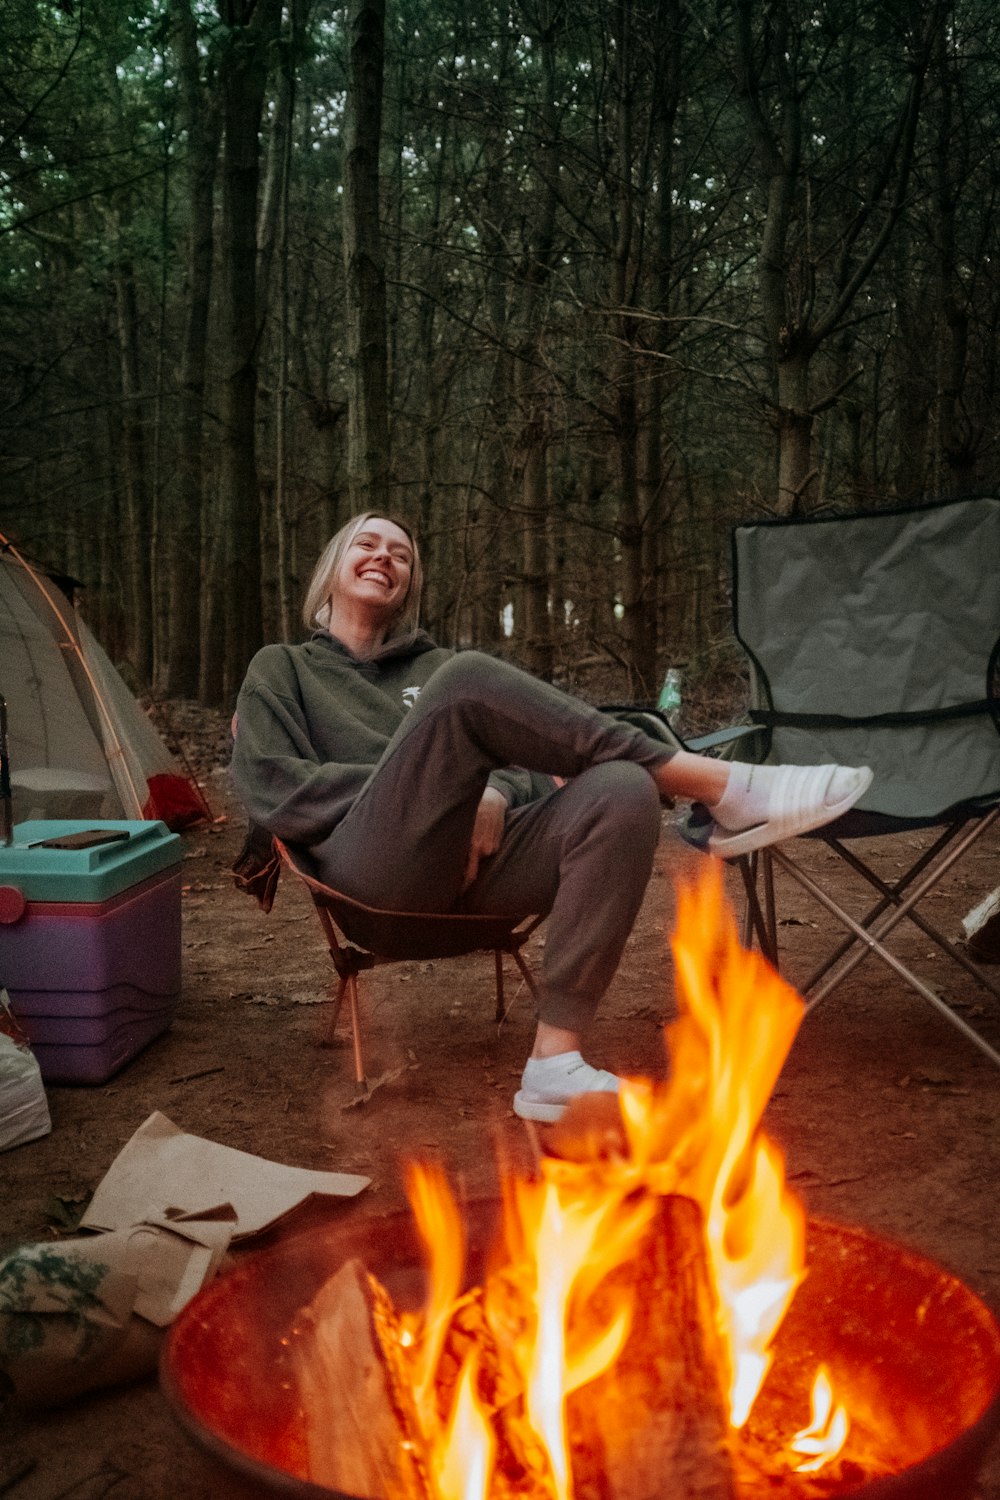 a person sitting on a chair by a campfire